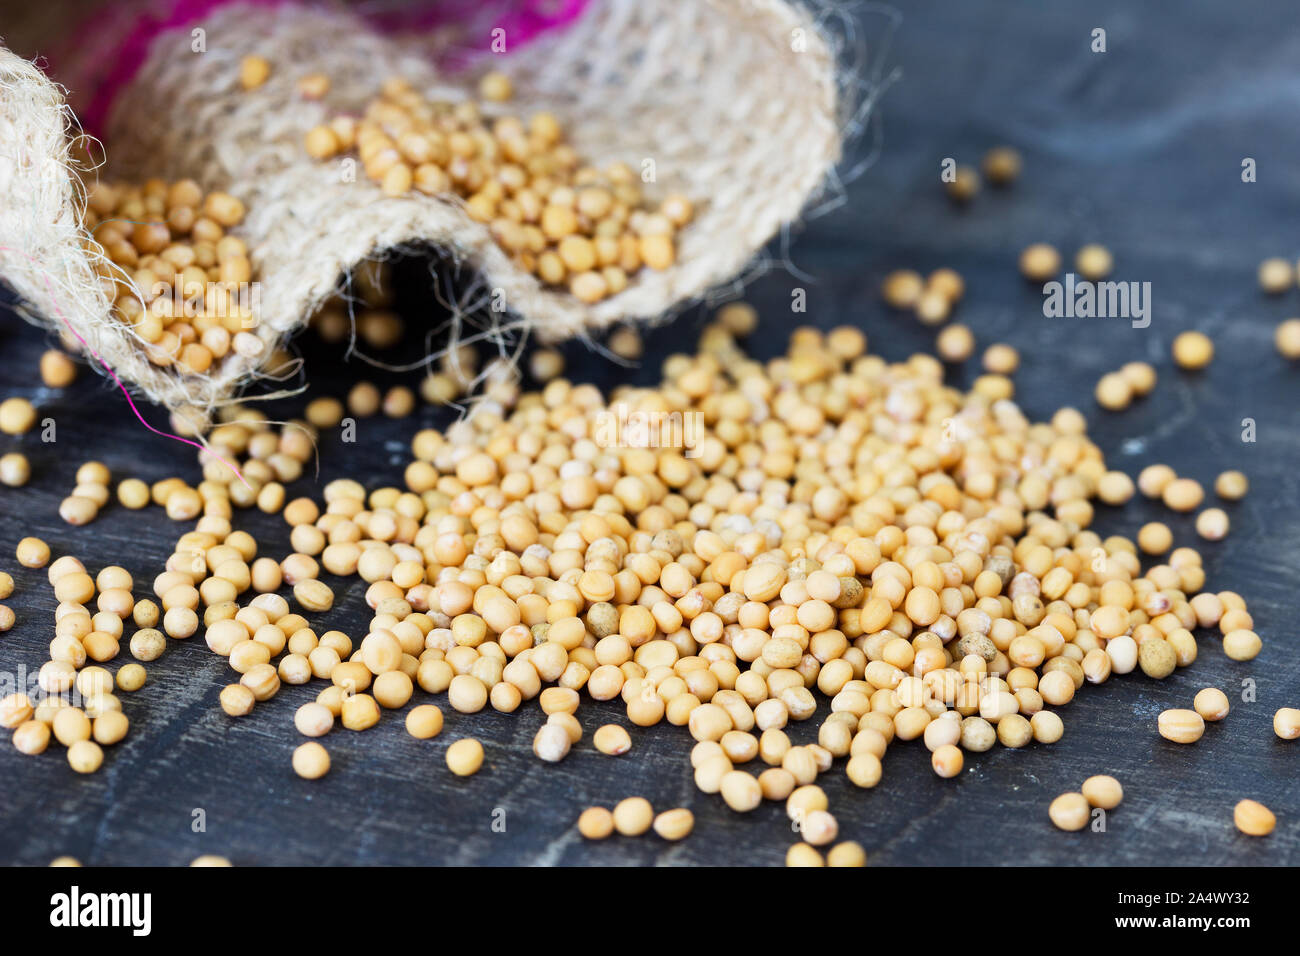 Seeds of yellow mustard on a wooden table Stock Photo